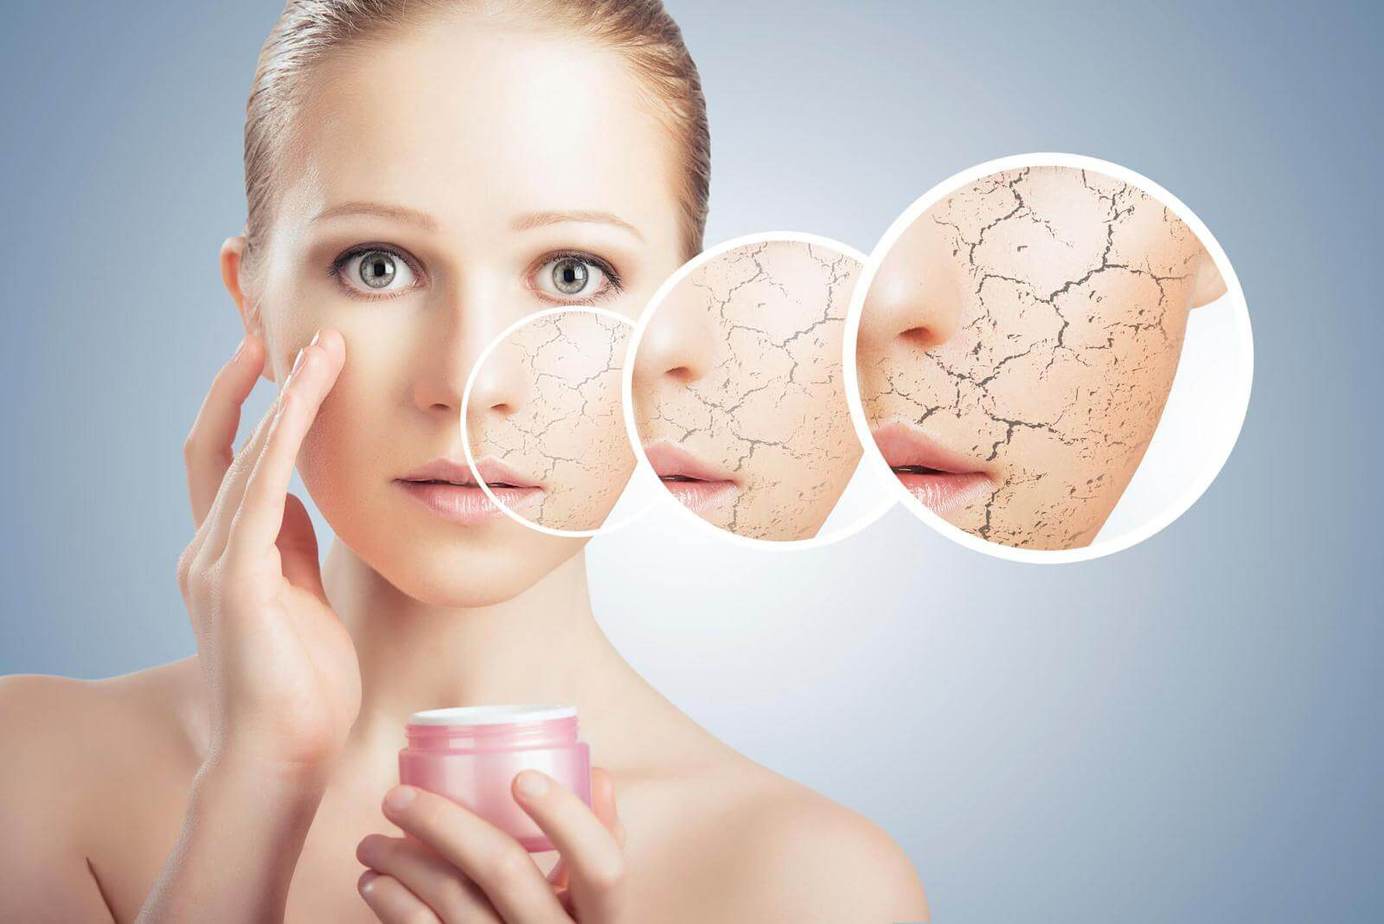 Eliminate Dry Skin With Authentic Simple Methods